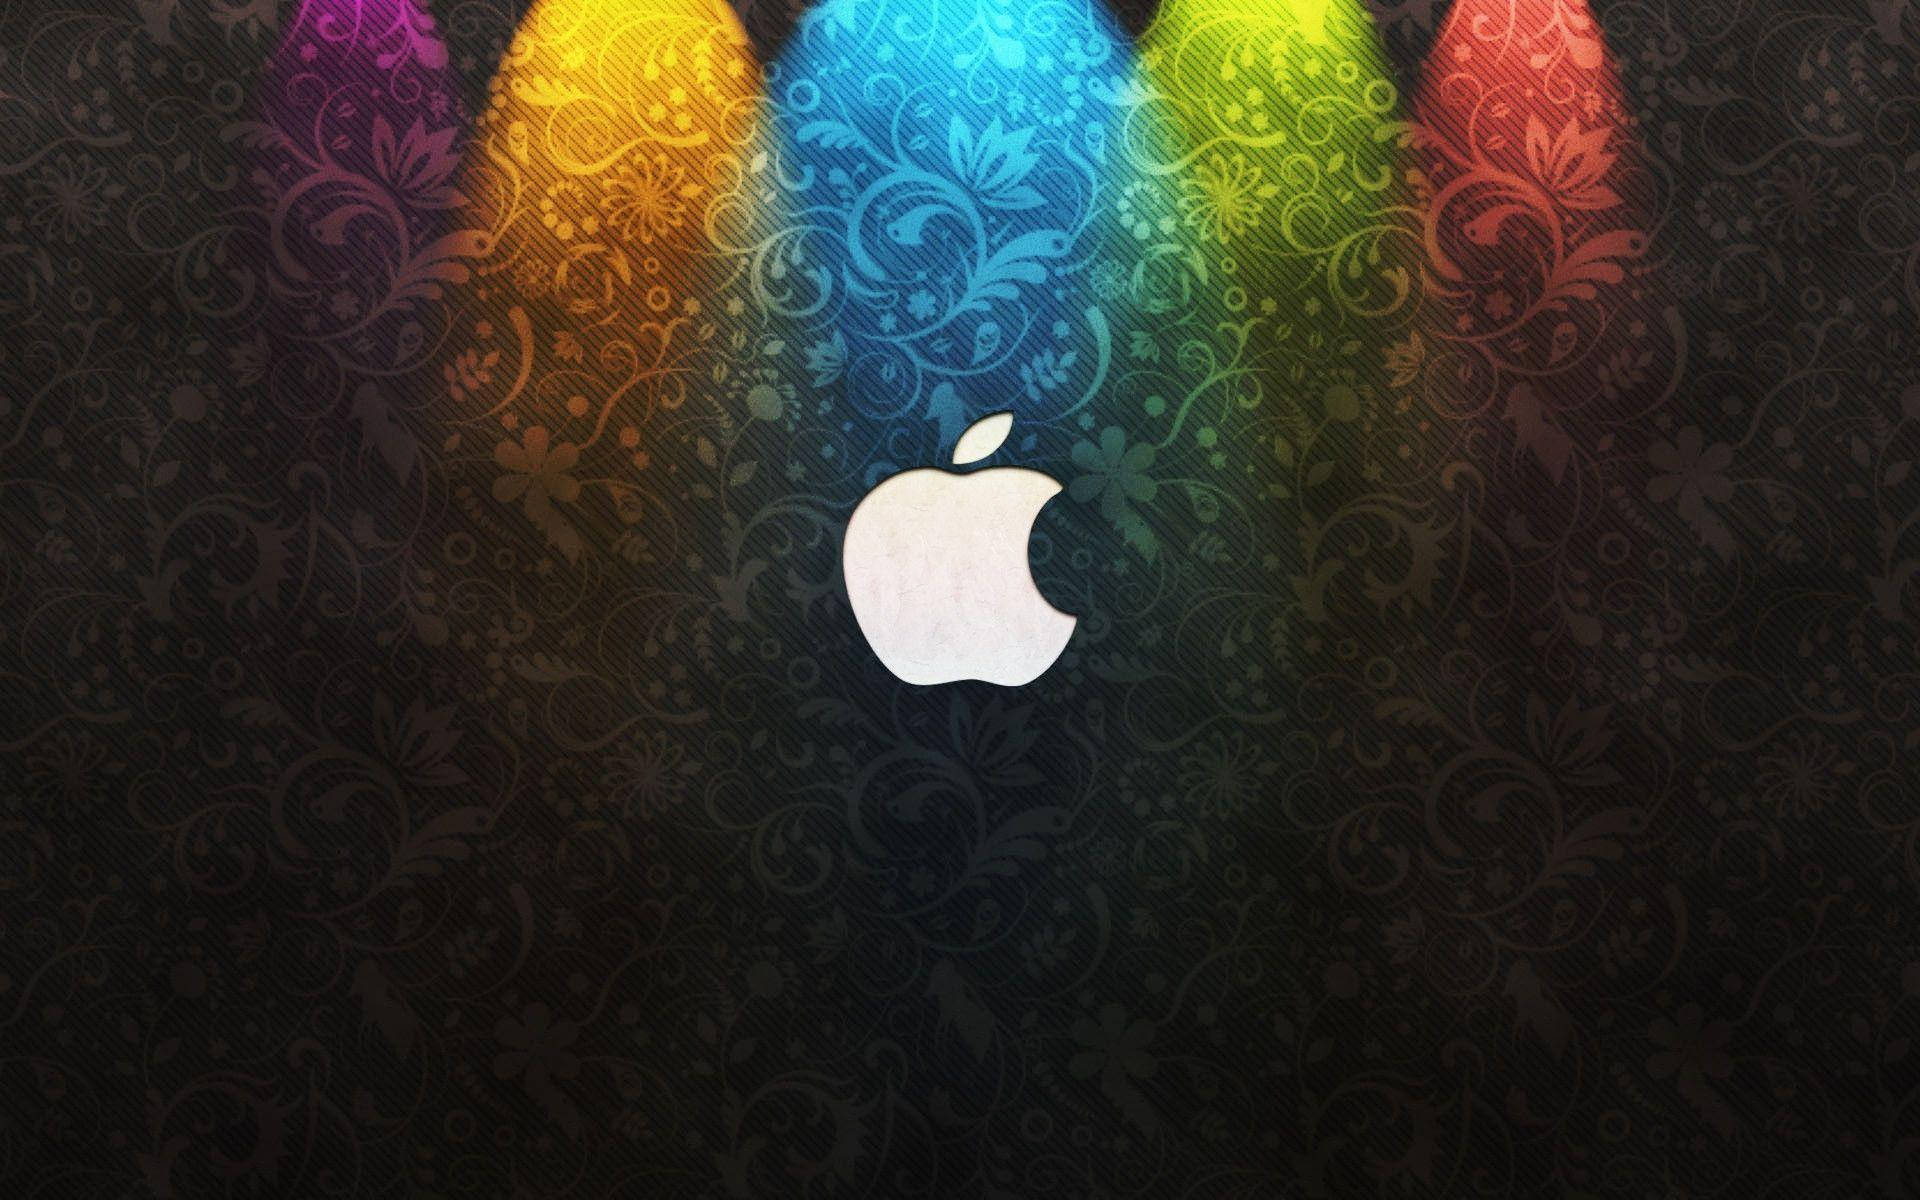 Apple Logo 4k Against Damask Wall Picture